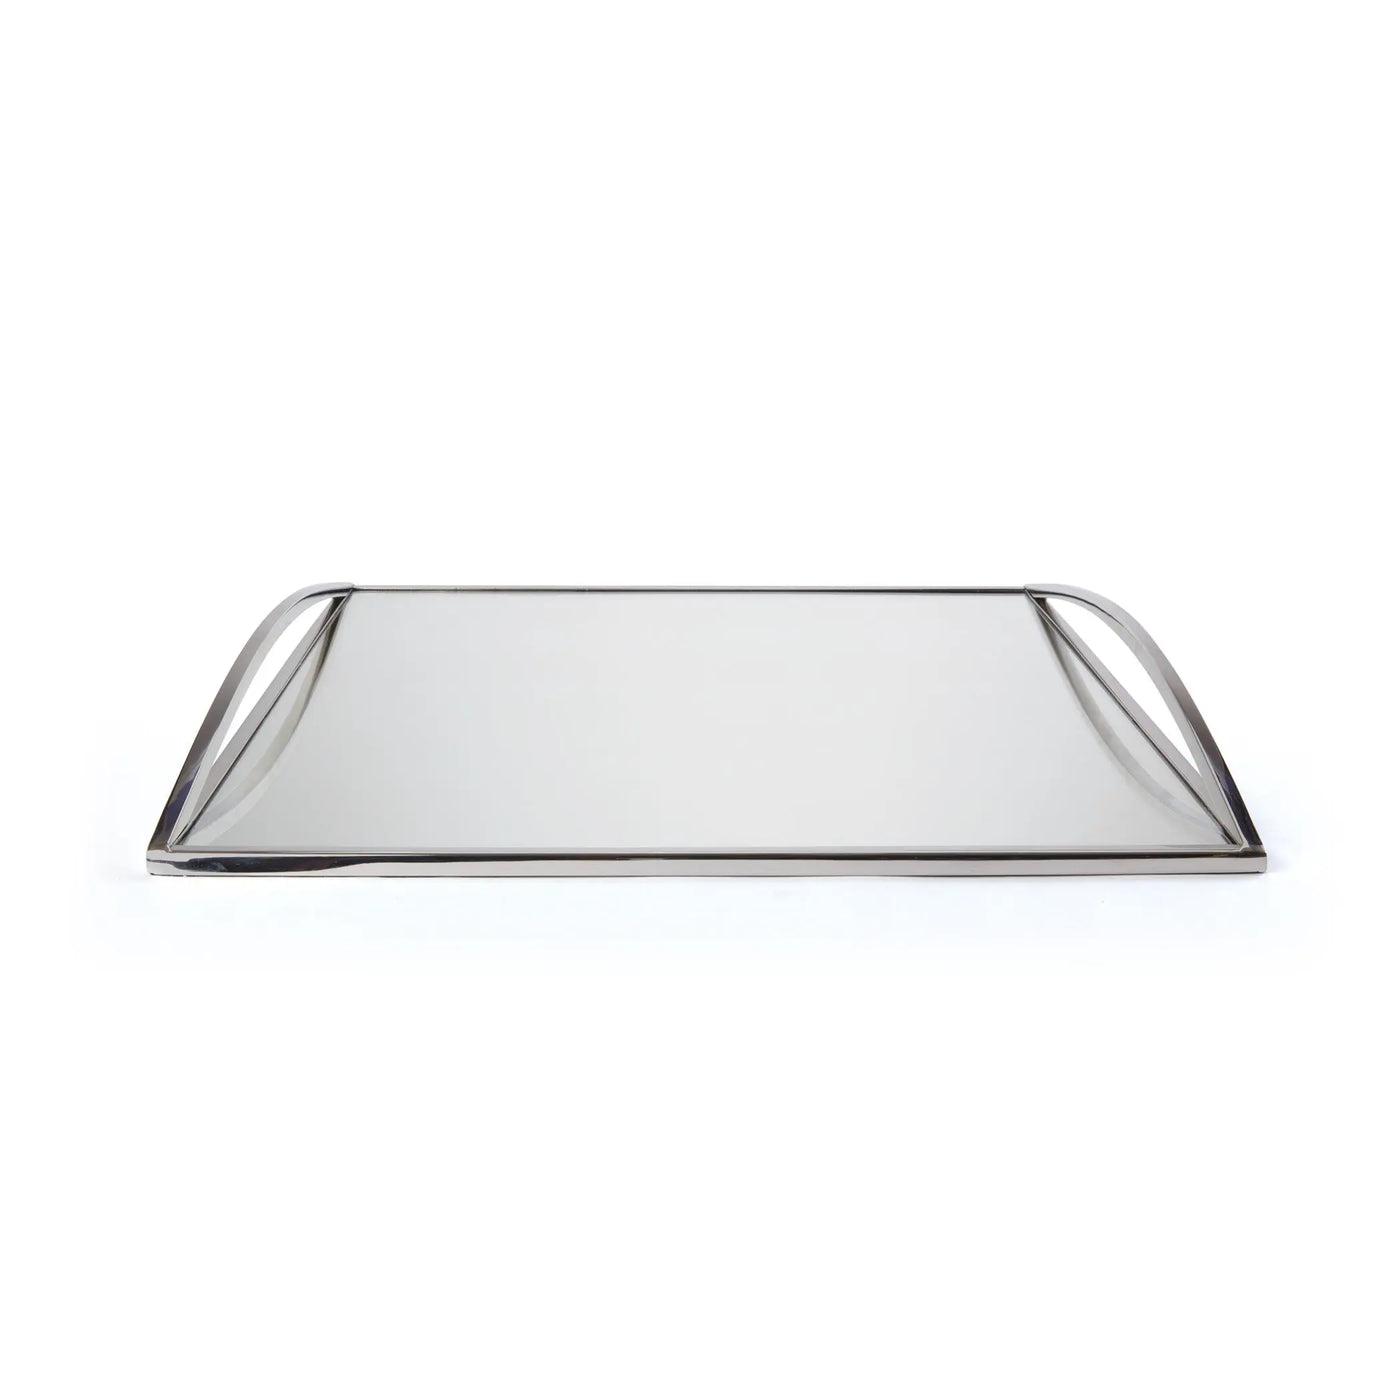 TRAY STAINLESS STEEL WITH HANDLES SQUARE